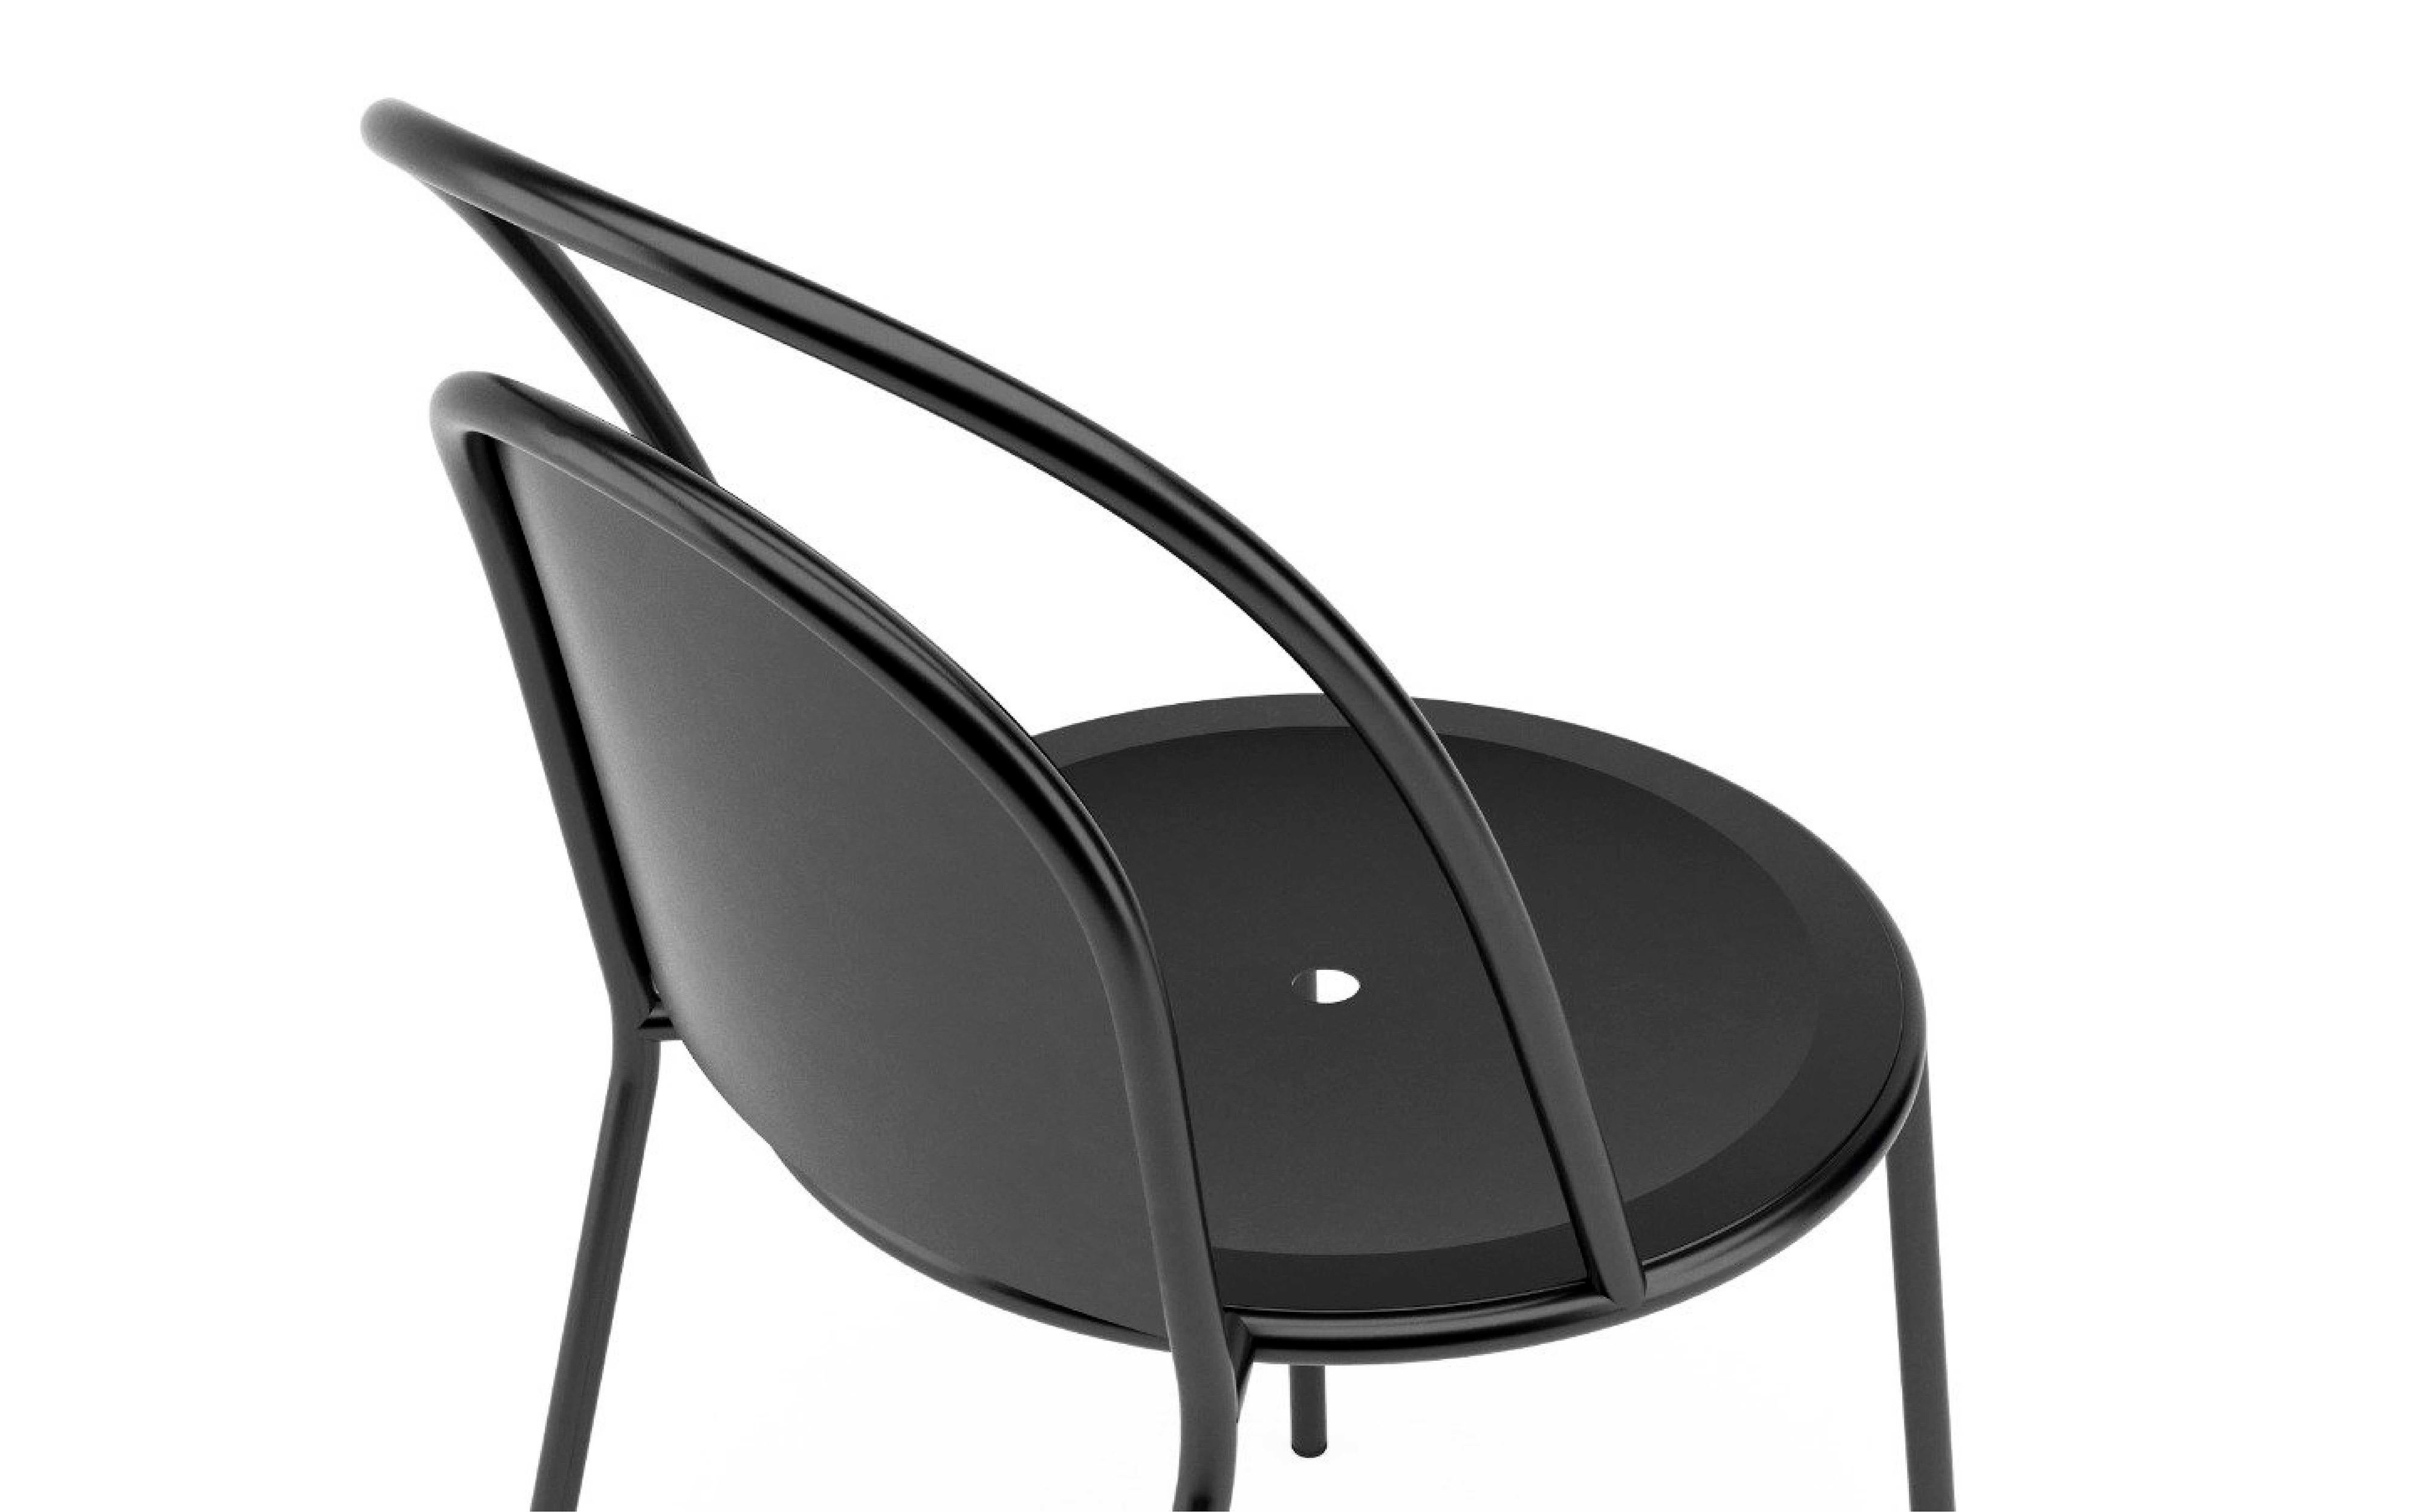 The design of the Dune chair is based on the repeated shape of the arch, architectural and mathematical. This chair has an elegant and light aesthetic and is suitable for outdoors.

Indoor / Outdoor
Material - Powder coated high carbon steel,